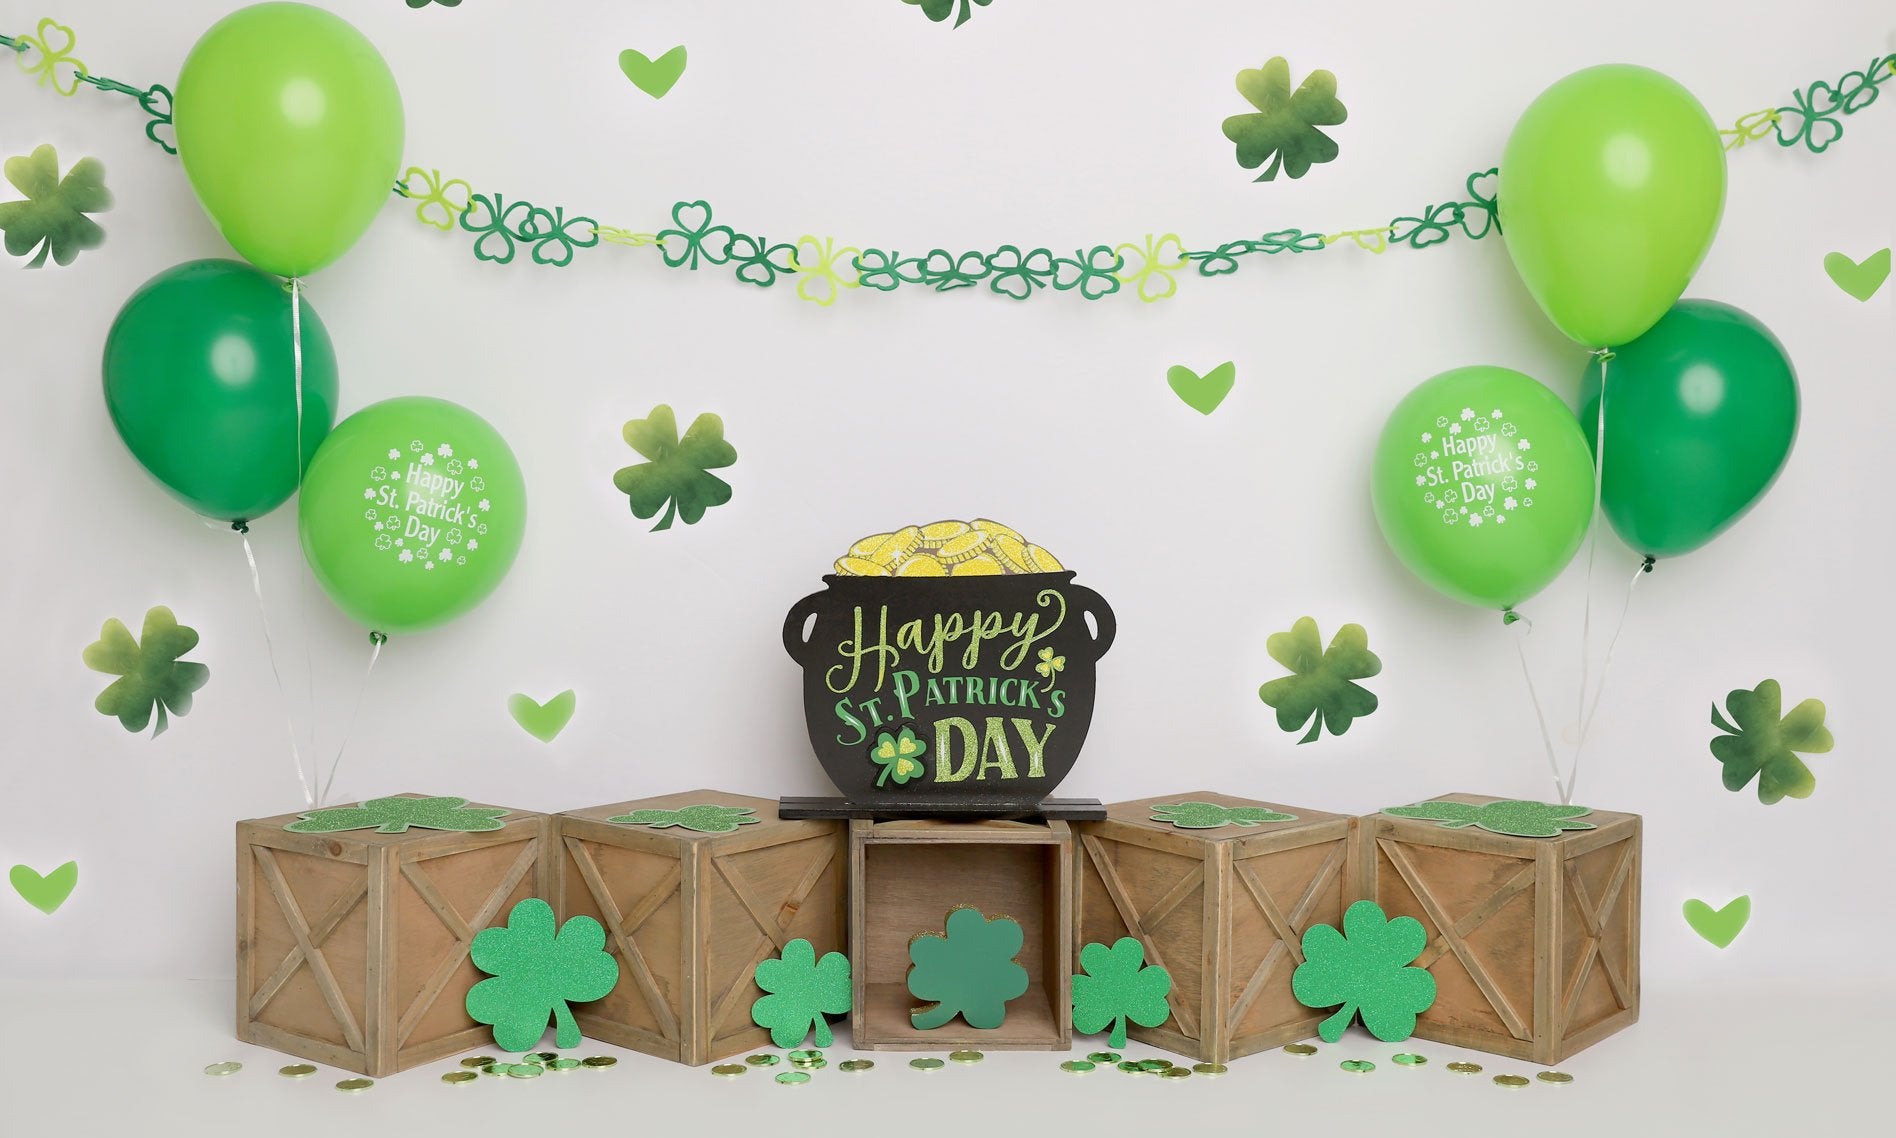 Kate St.patricks Day Green Party Backdrop Designed by Melissa King